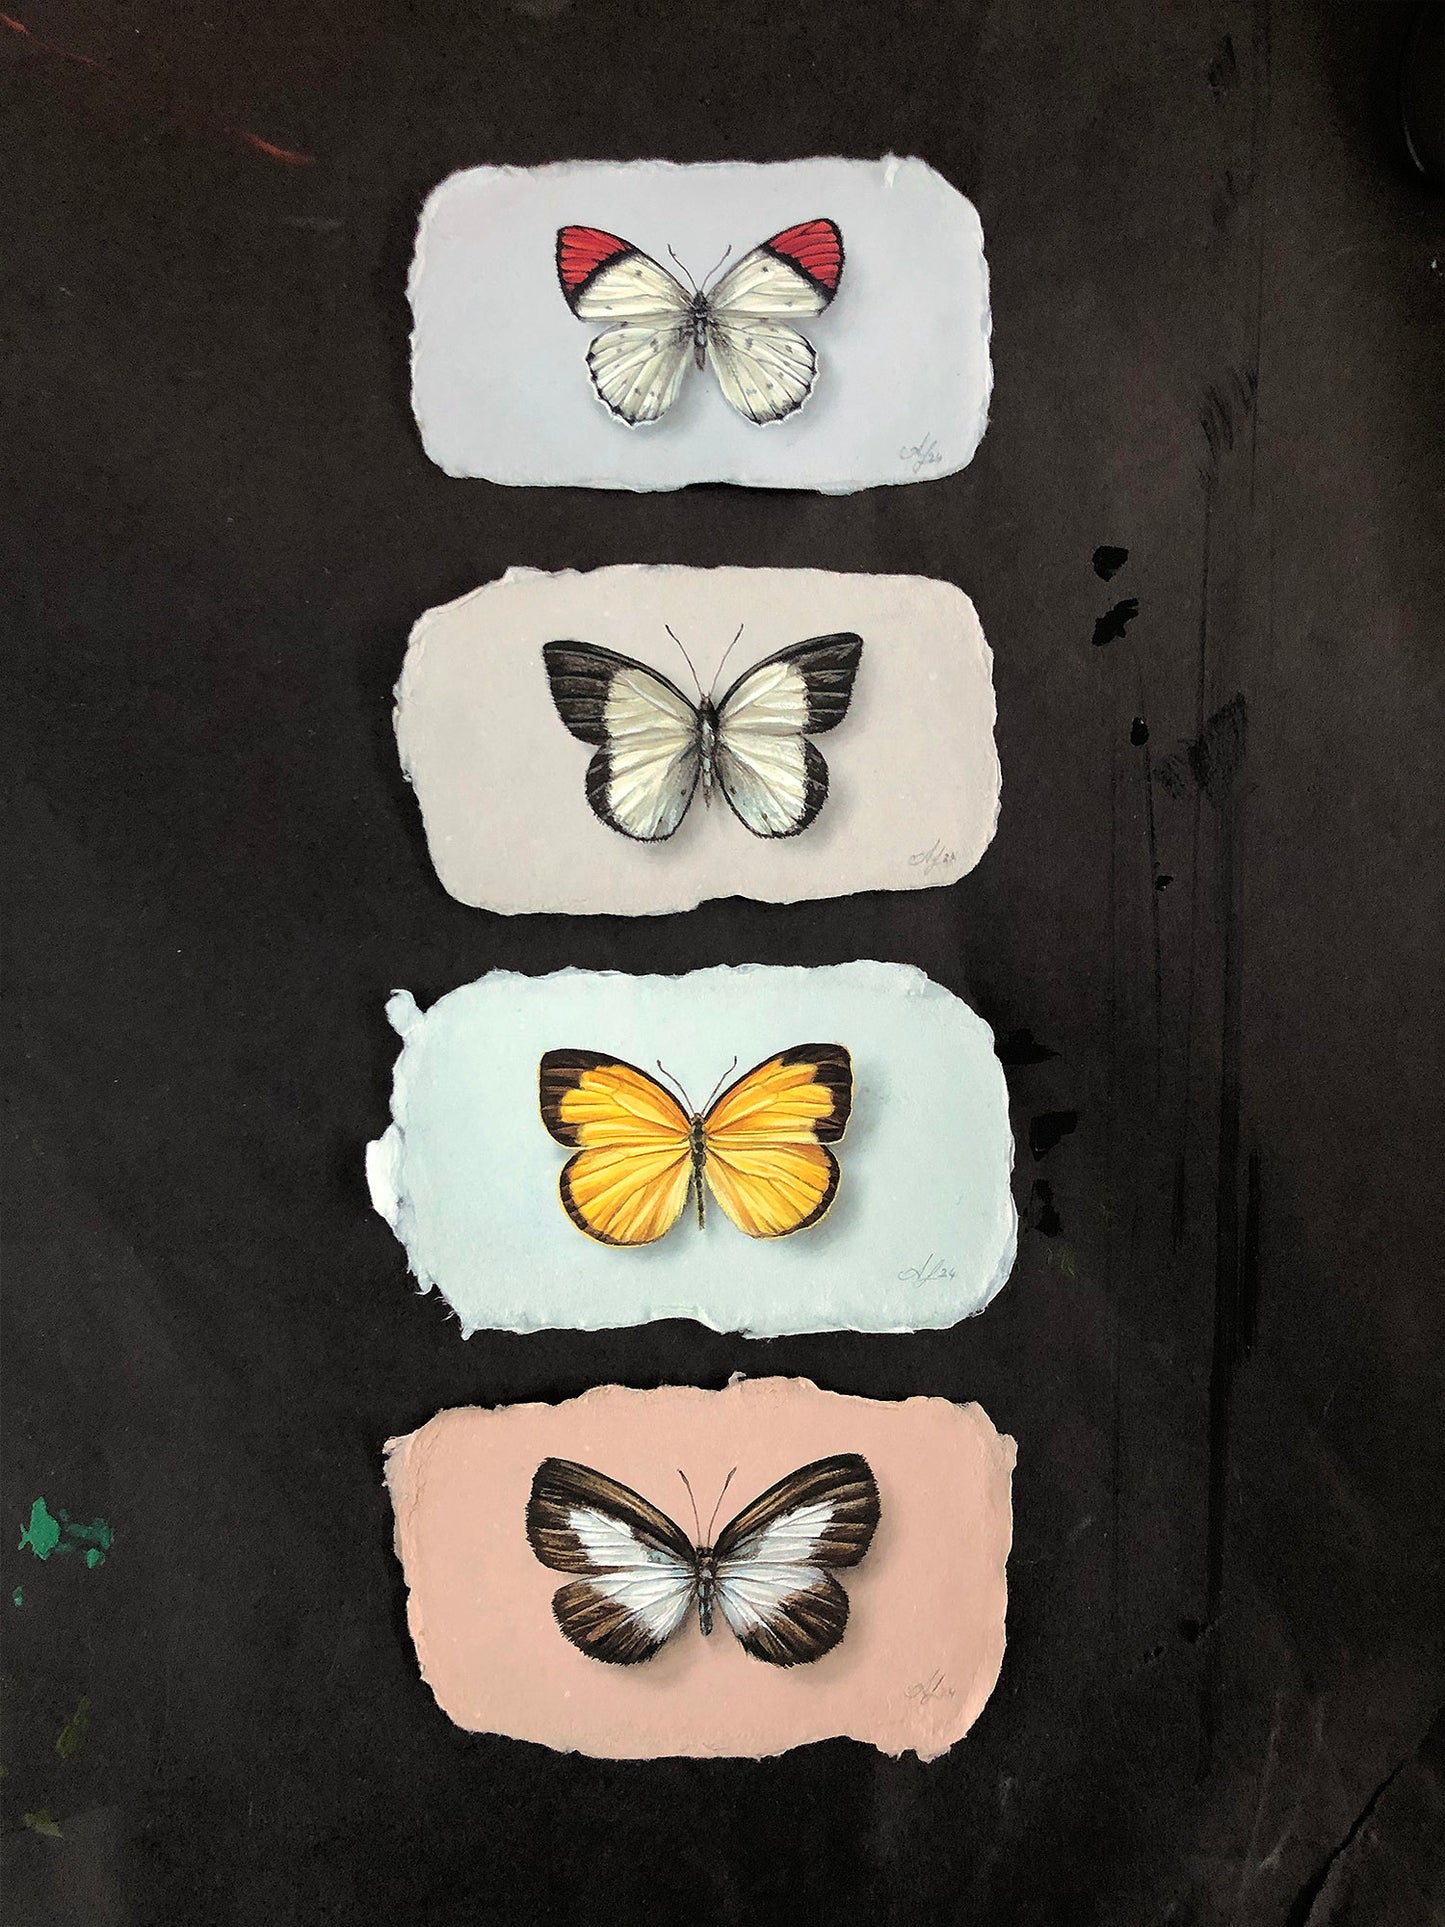 Butterfly on Handmade Paper #3 - 4.75 x 2.75"